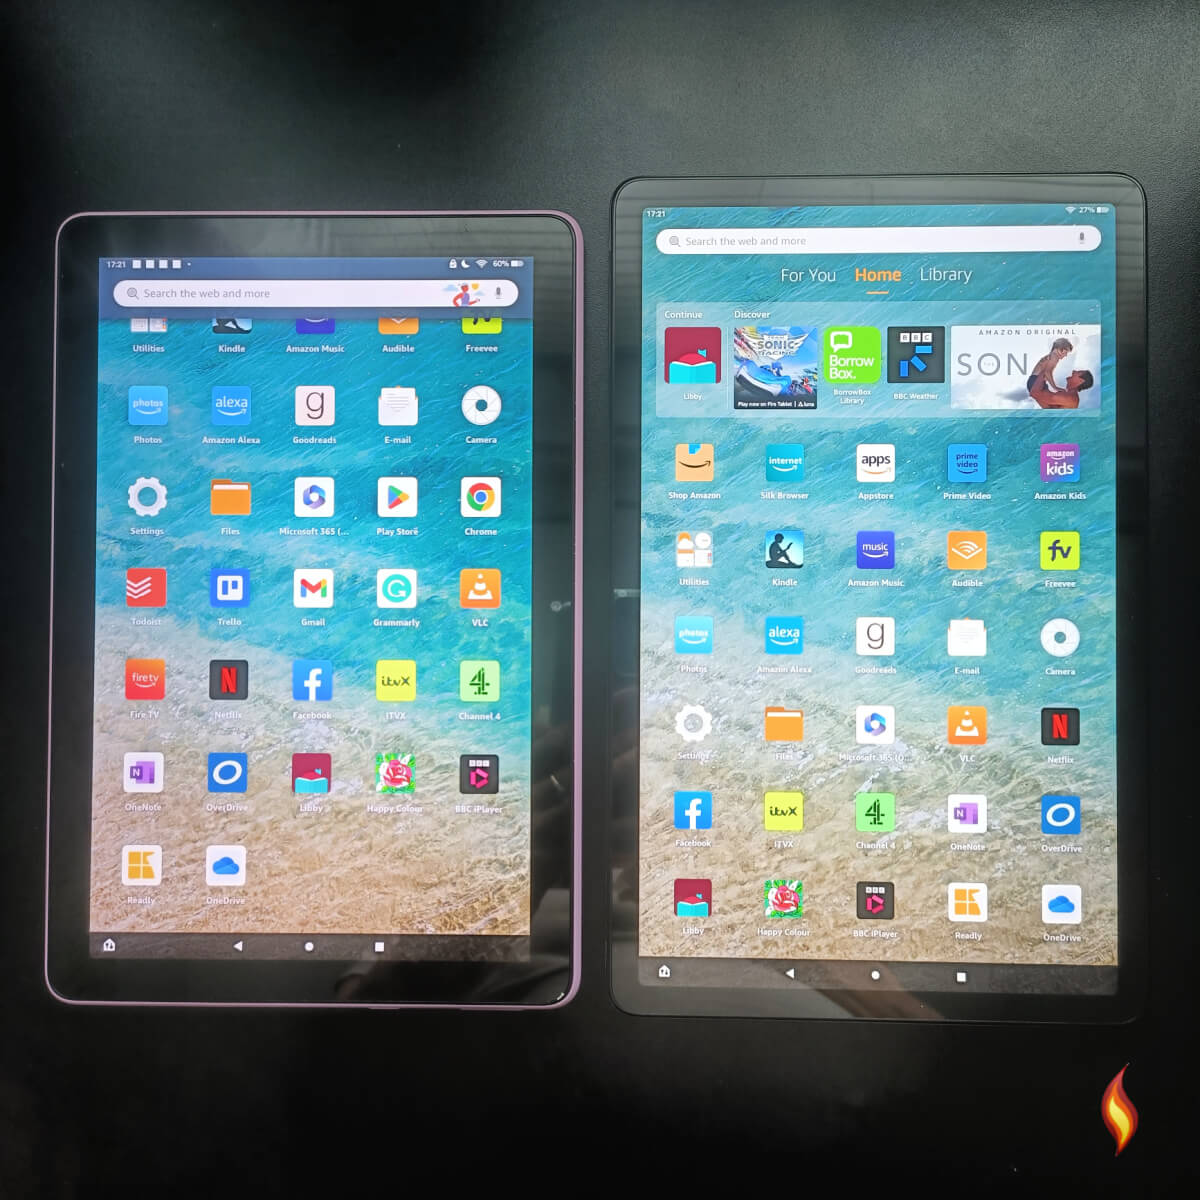 Fire Max 11 Tablet 2023 Guide; 13th Generation Compactible